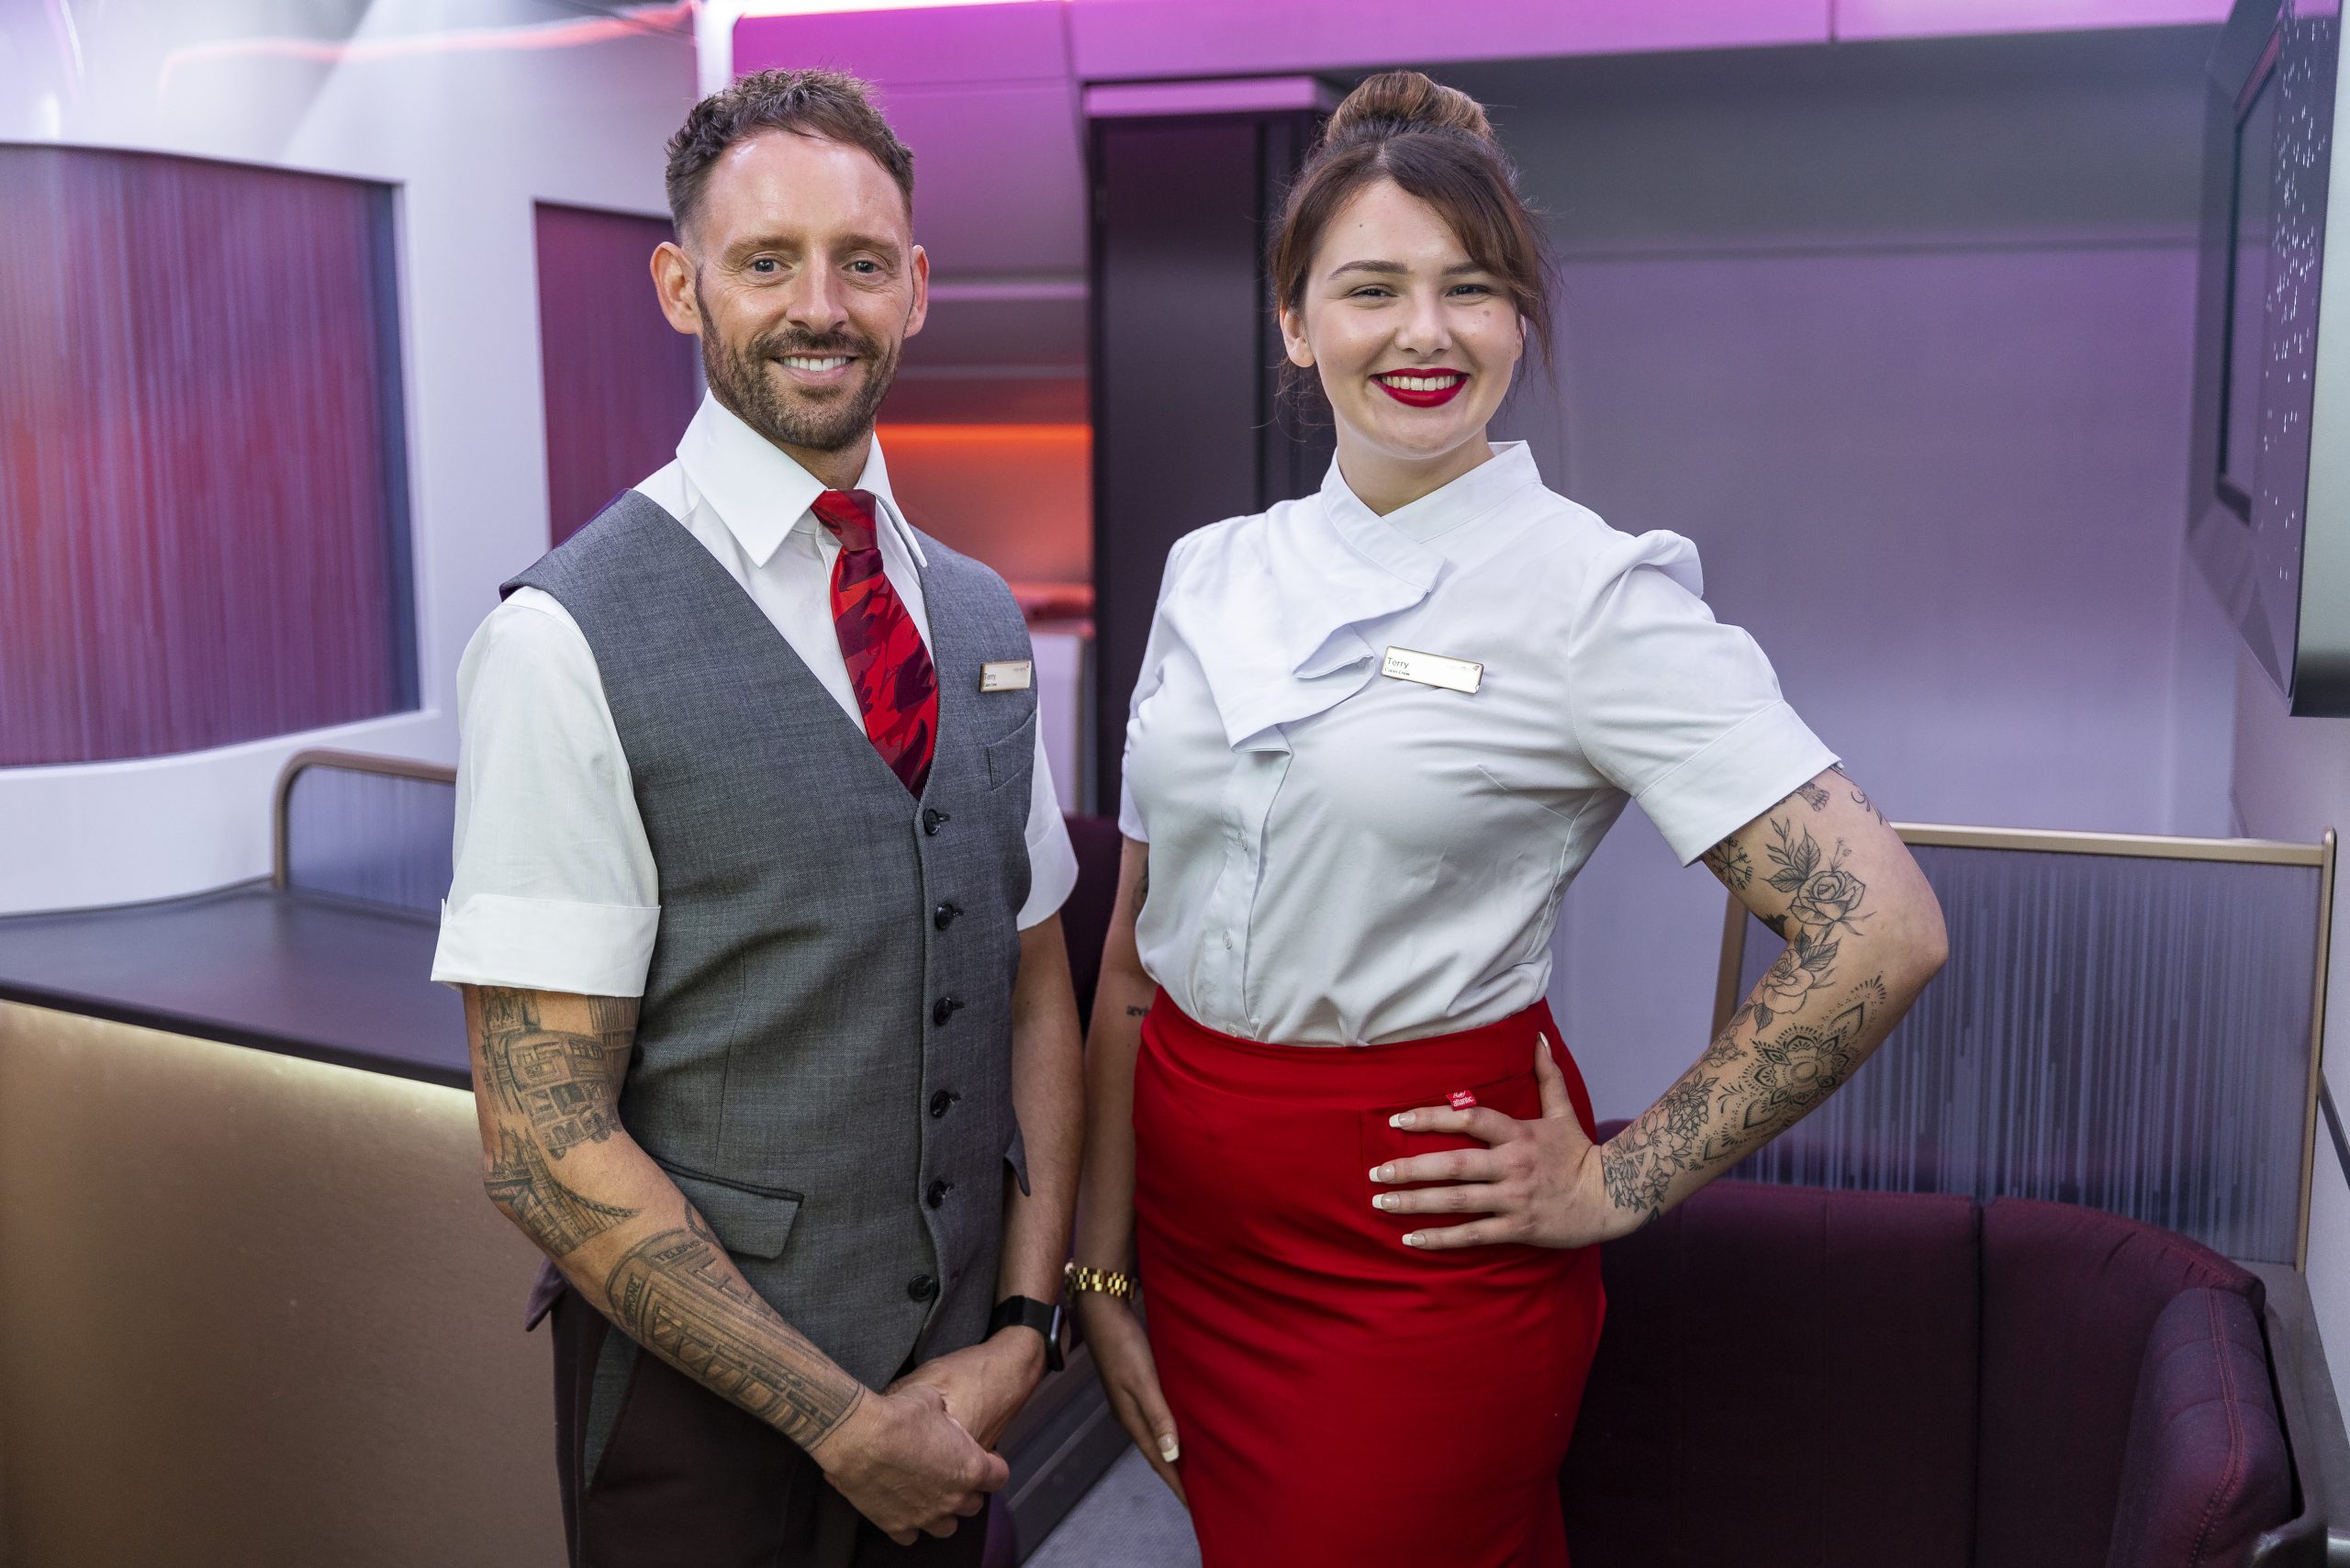 Virgin Atlantic Becomes First British Airline to Let Cabin Crew Display Visible ..